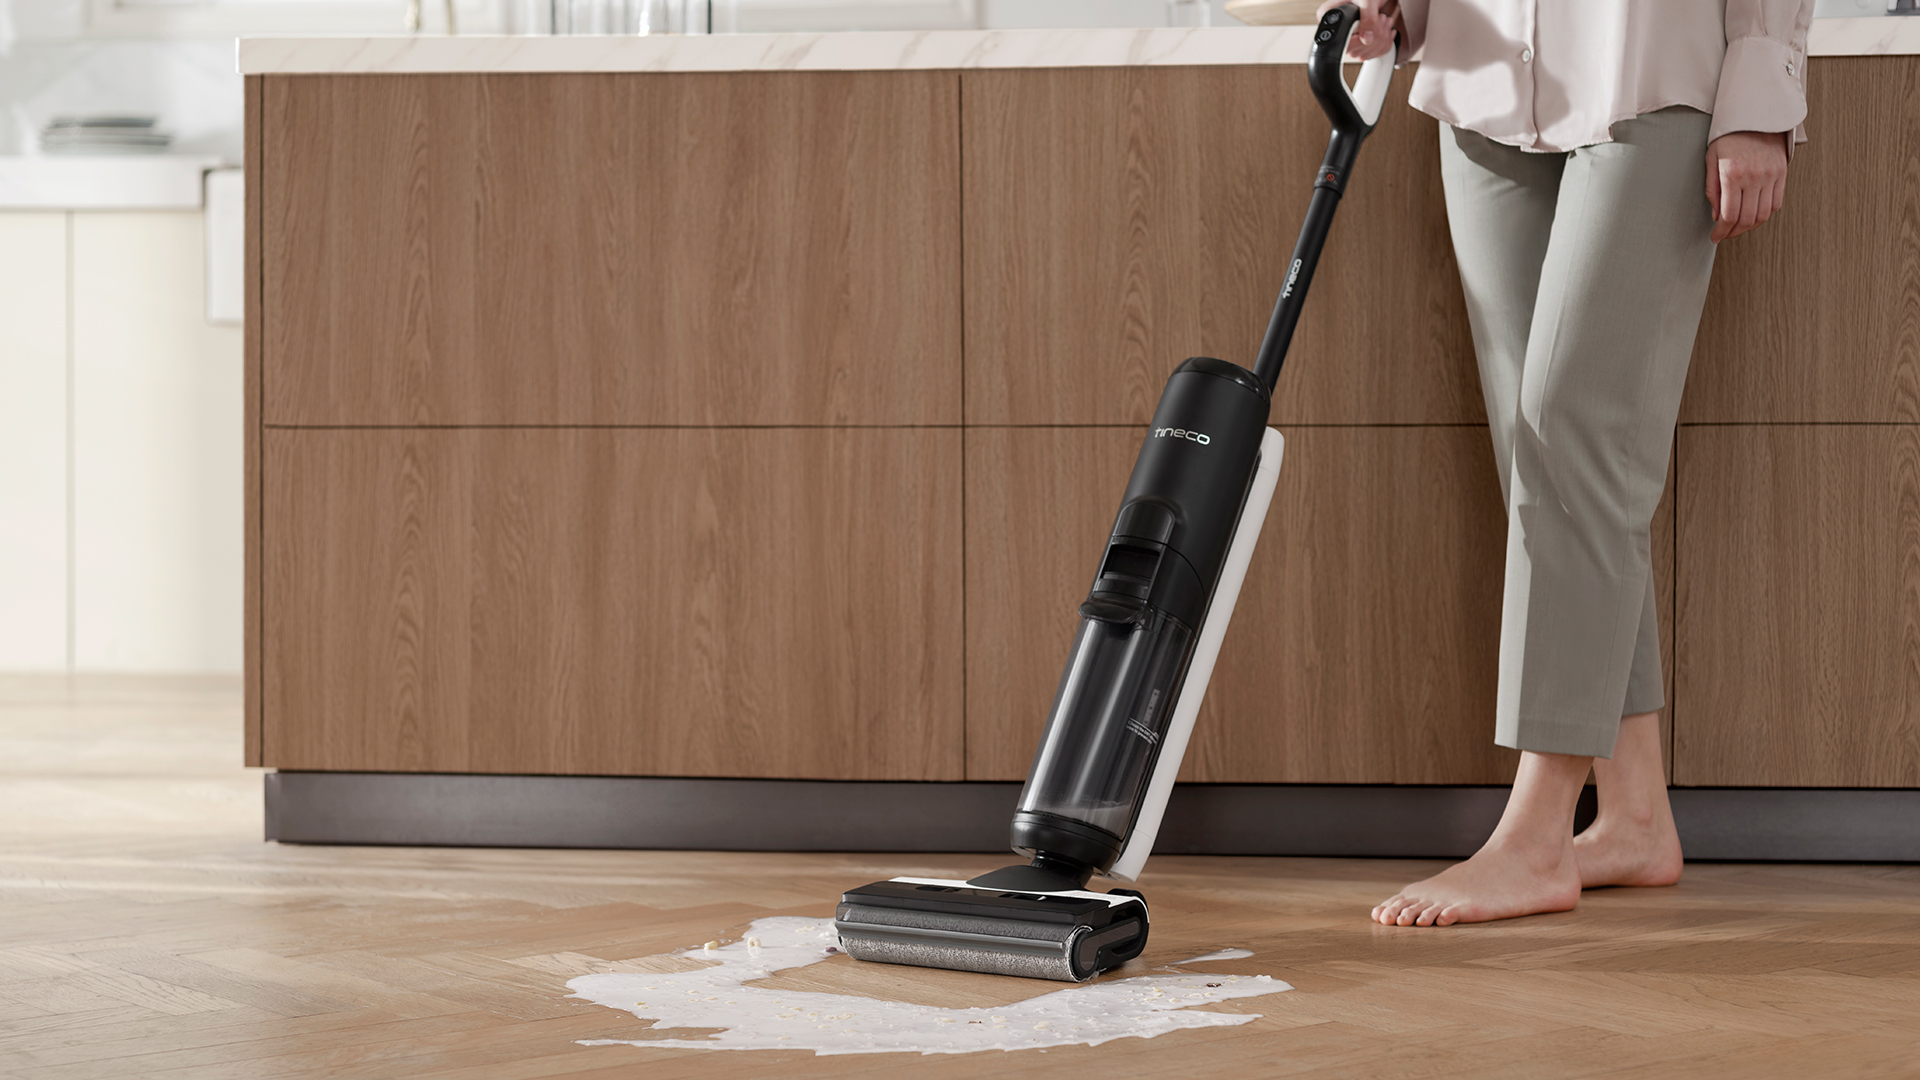 Tineco S6 vs S7 – Which Tineco is better for floor washing?